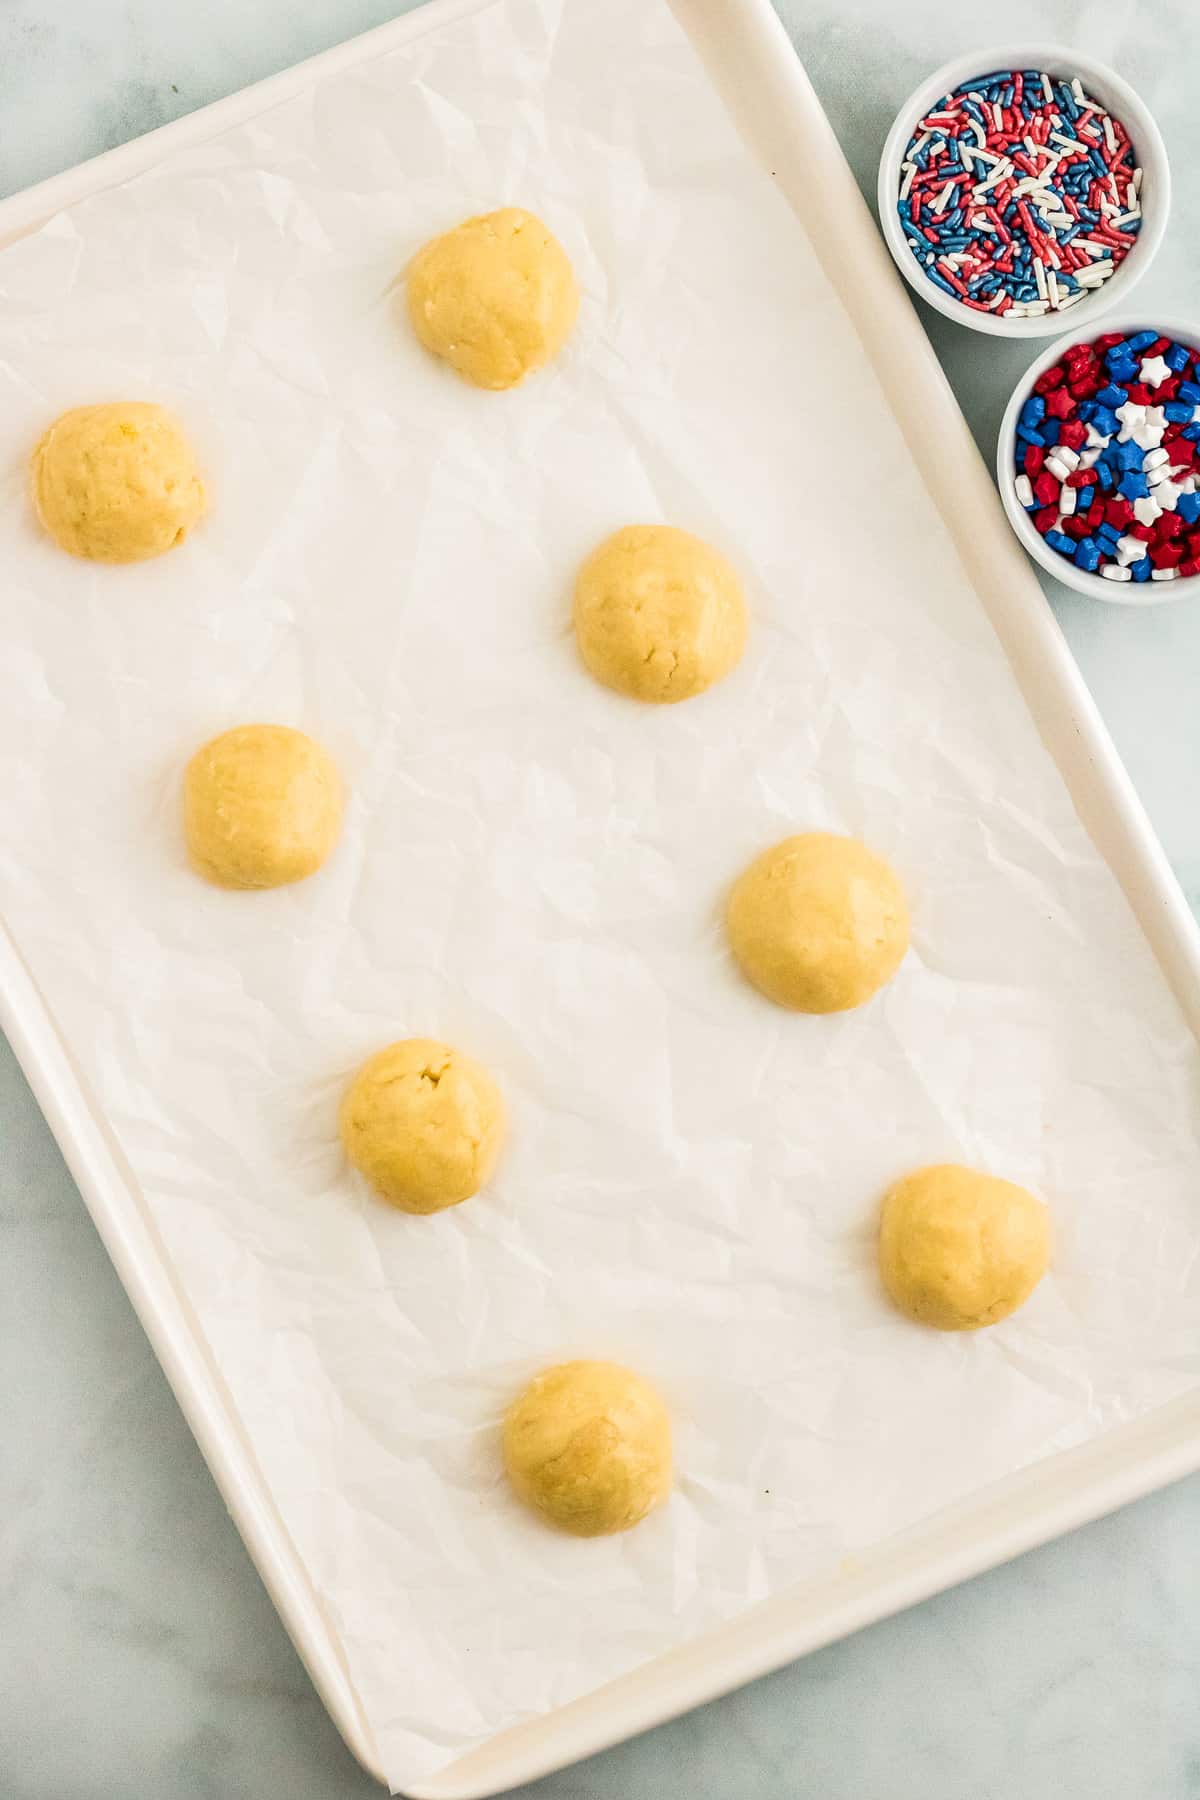 Roll the Cake Mix into 1-1.5 Inch Balls and place on a Cookie Sheet.